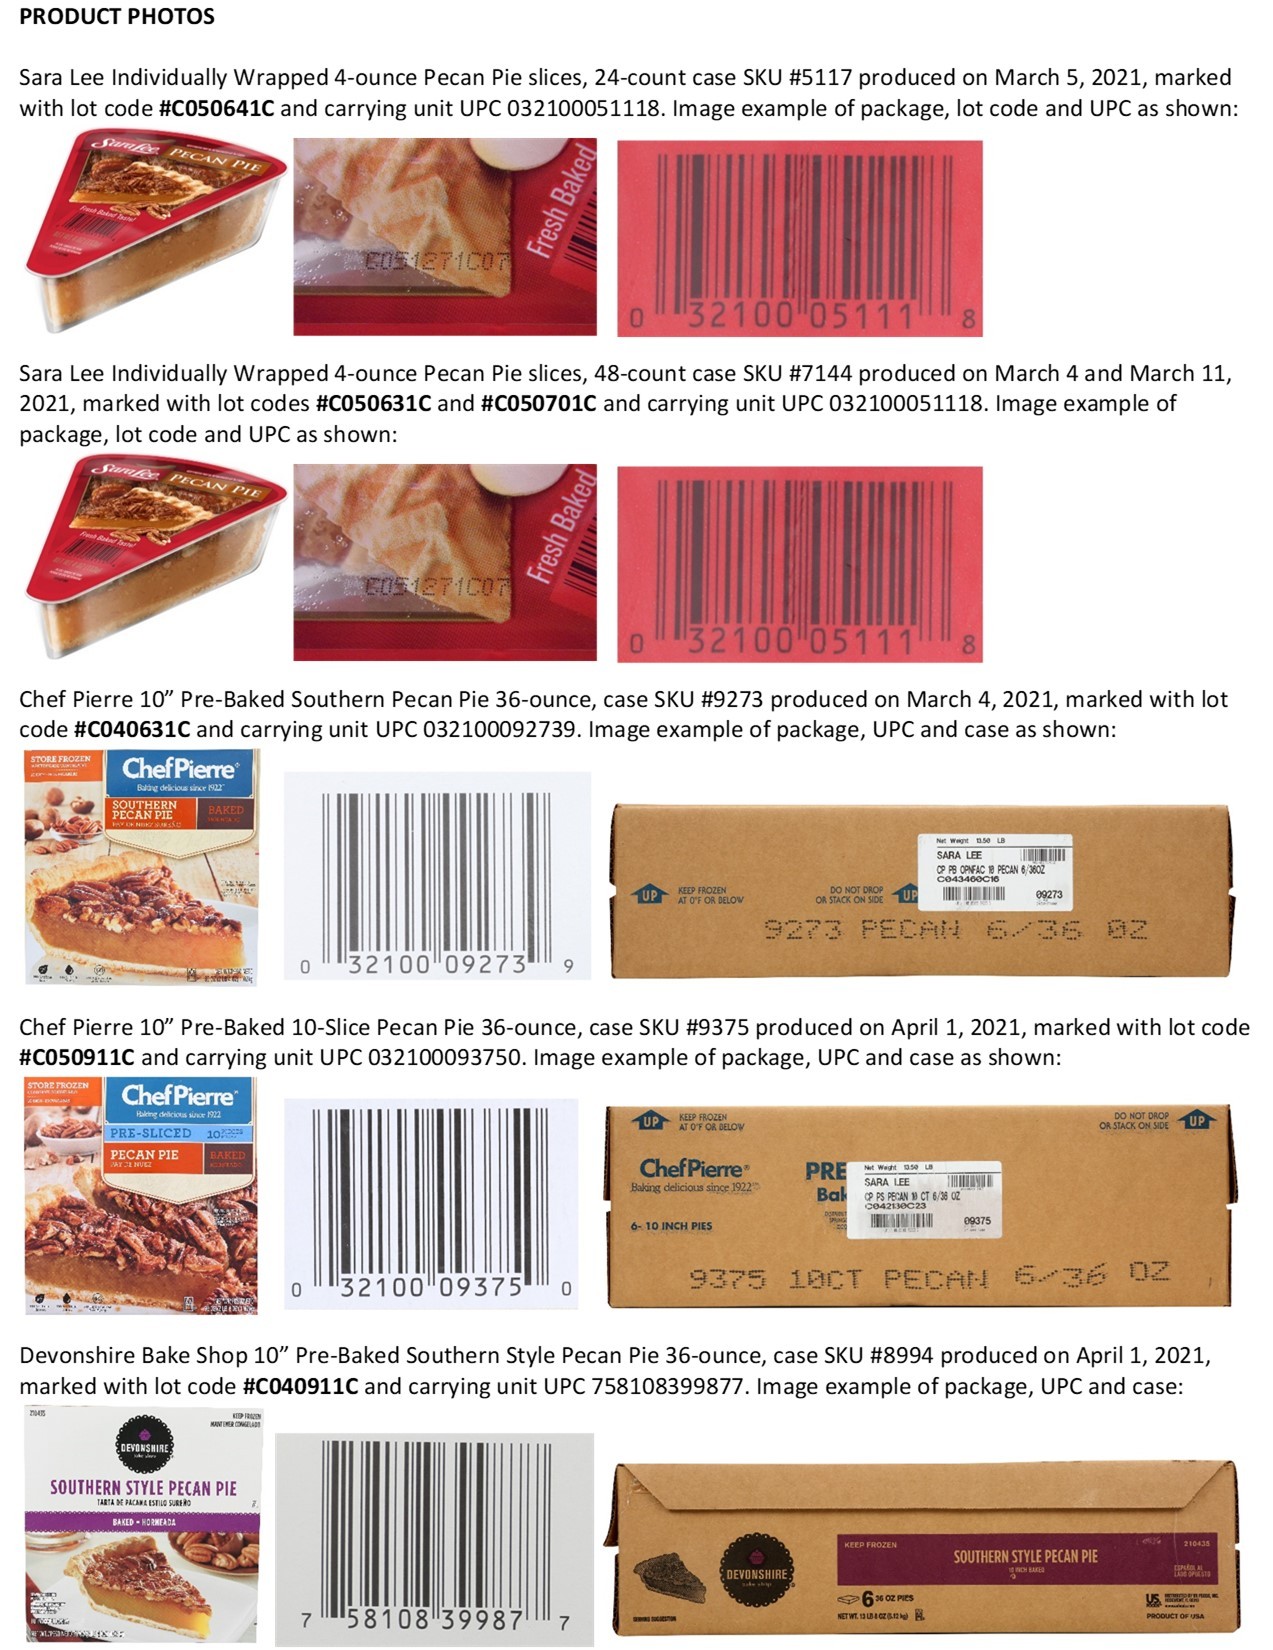 Sara Lee Frozen Bakery Issues Allergy Alert on Undeclared Peanuts in Pecan  Pies | Business Wire